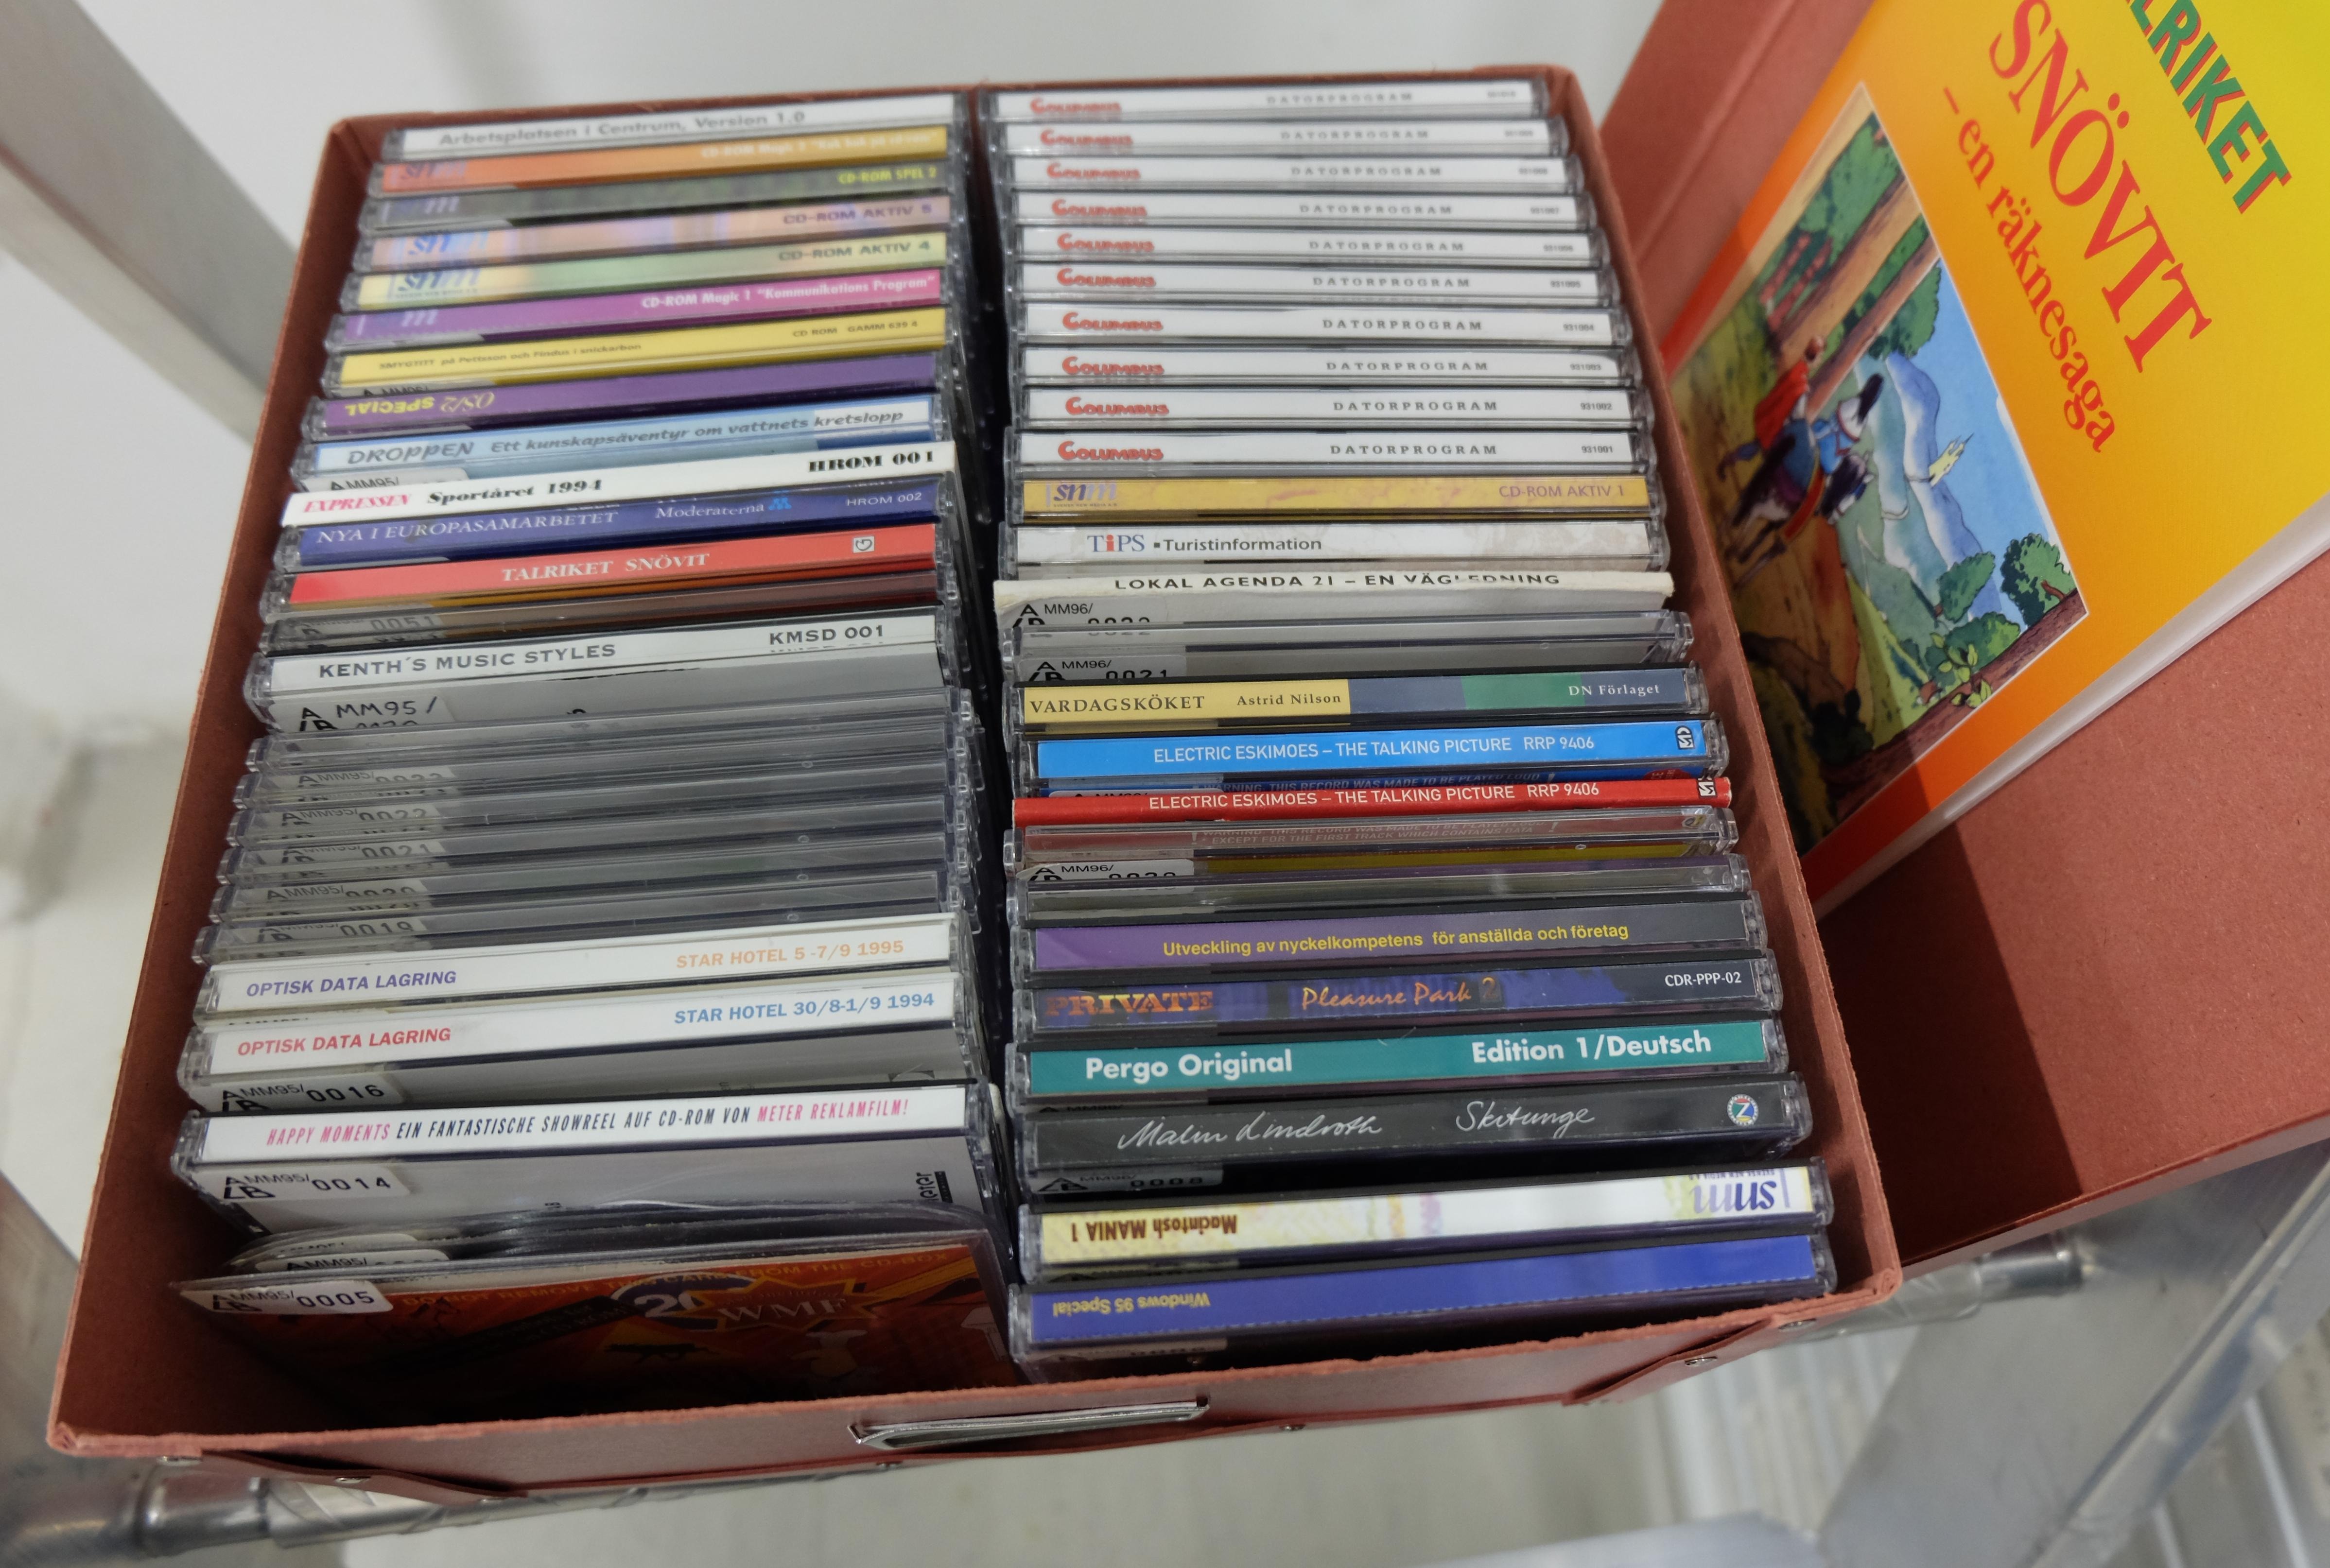 CD:s of different colors in a box.